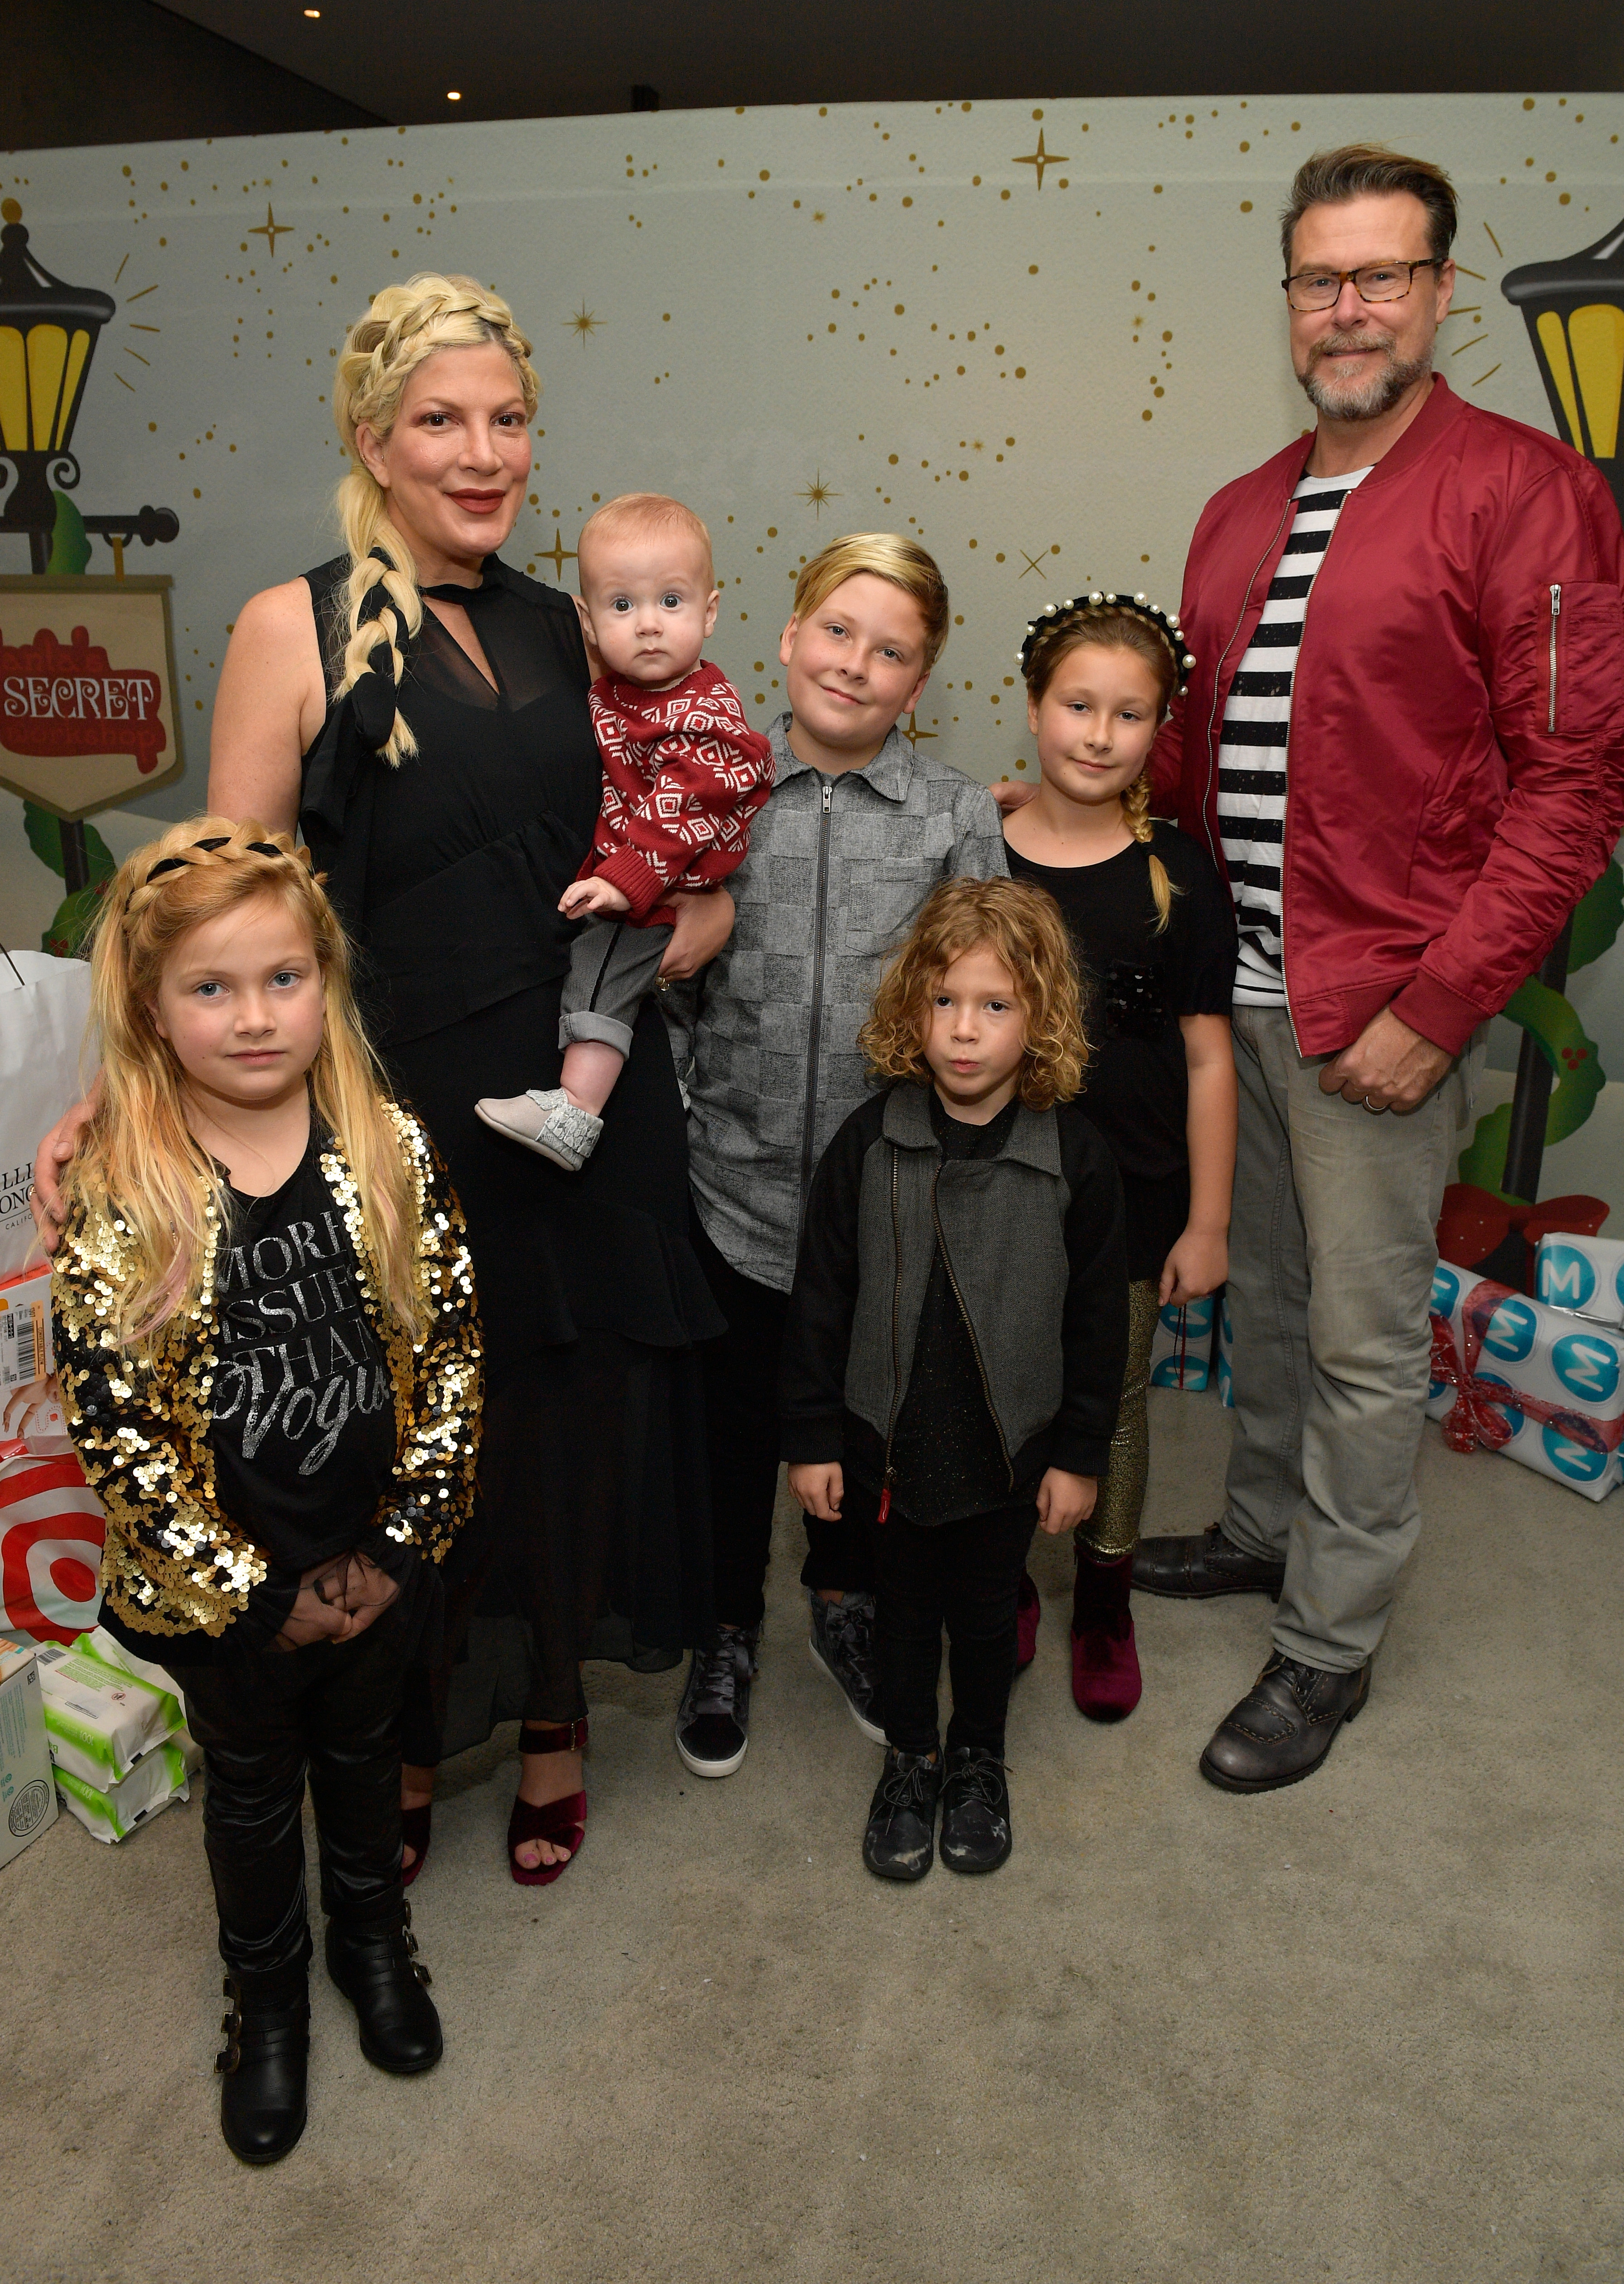 Tori Spelling, Dean McDermott, and their children at the 7th Annual Santa's Secret Workshop benefiting LA Family Housing at Andaz on December 2, 2017, in West Hollywood, California. | Source: Getty Images